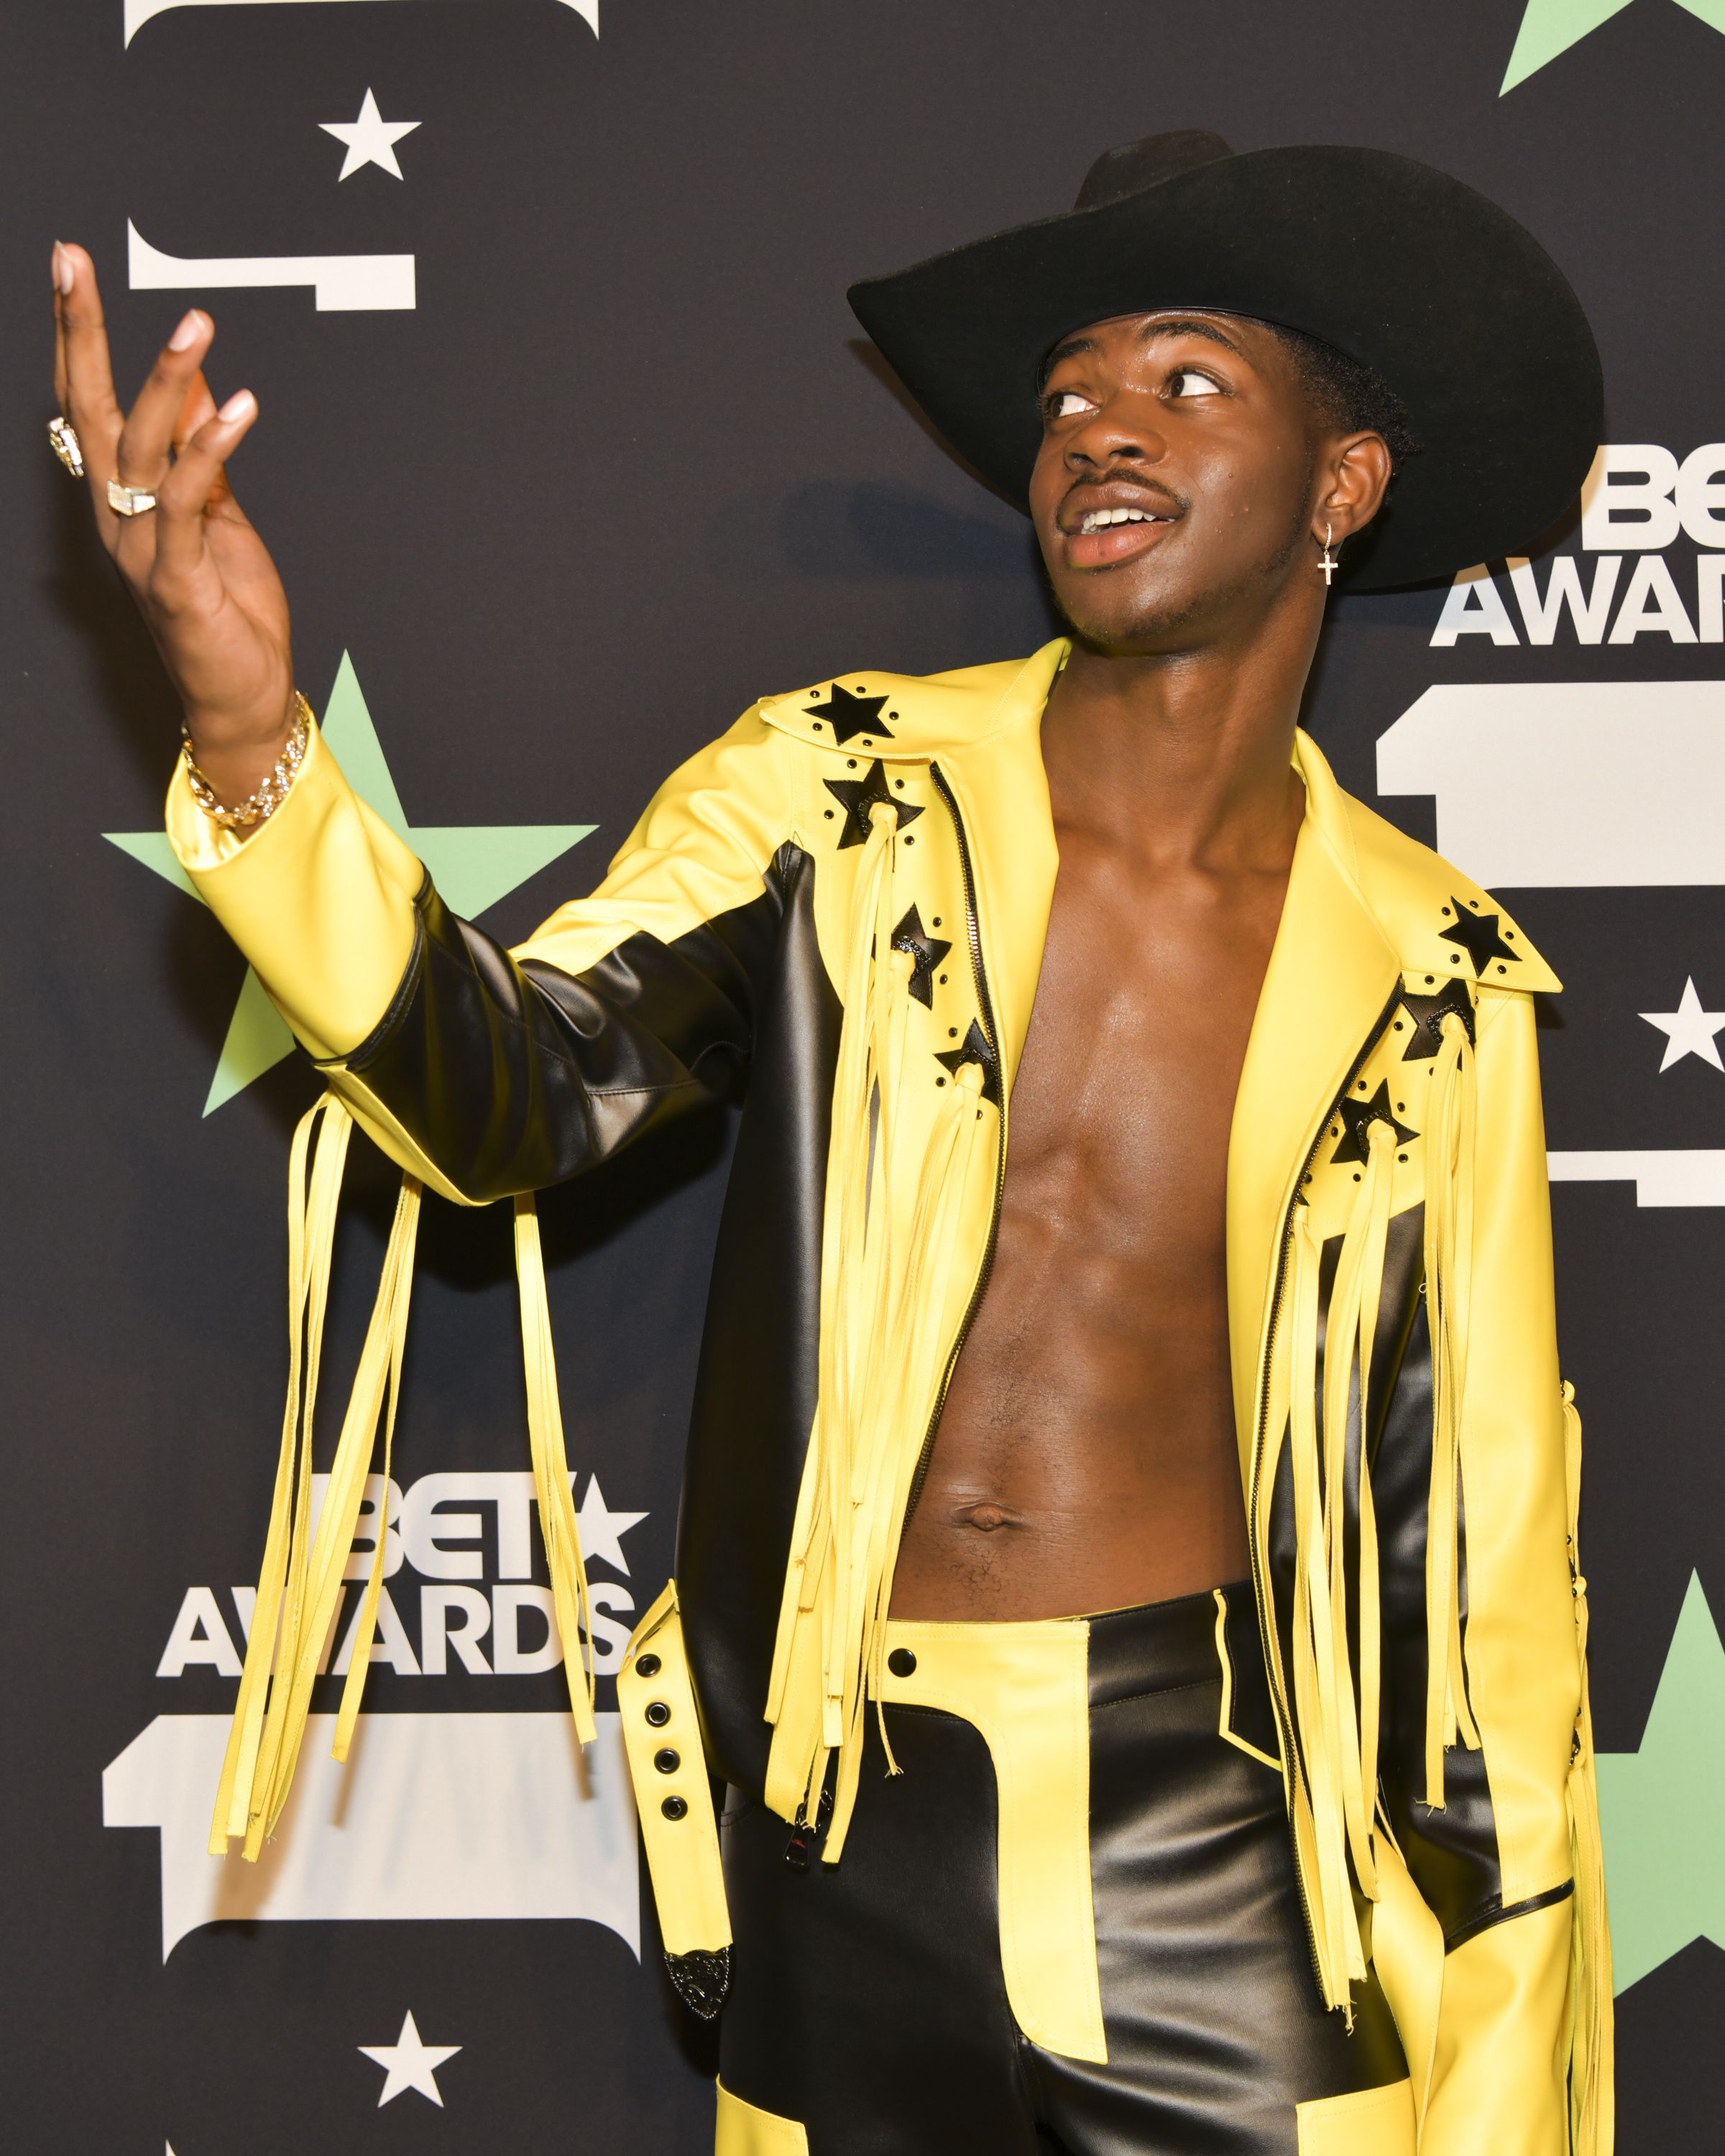 lil nas x gay or straight